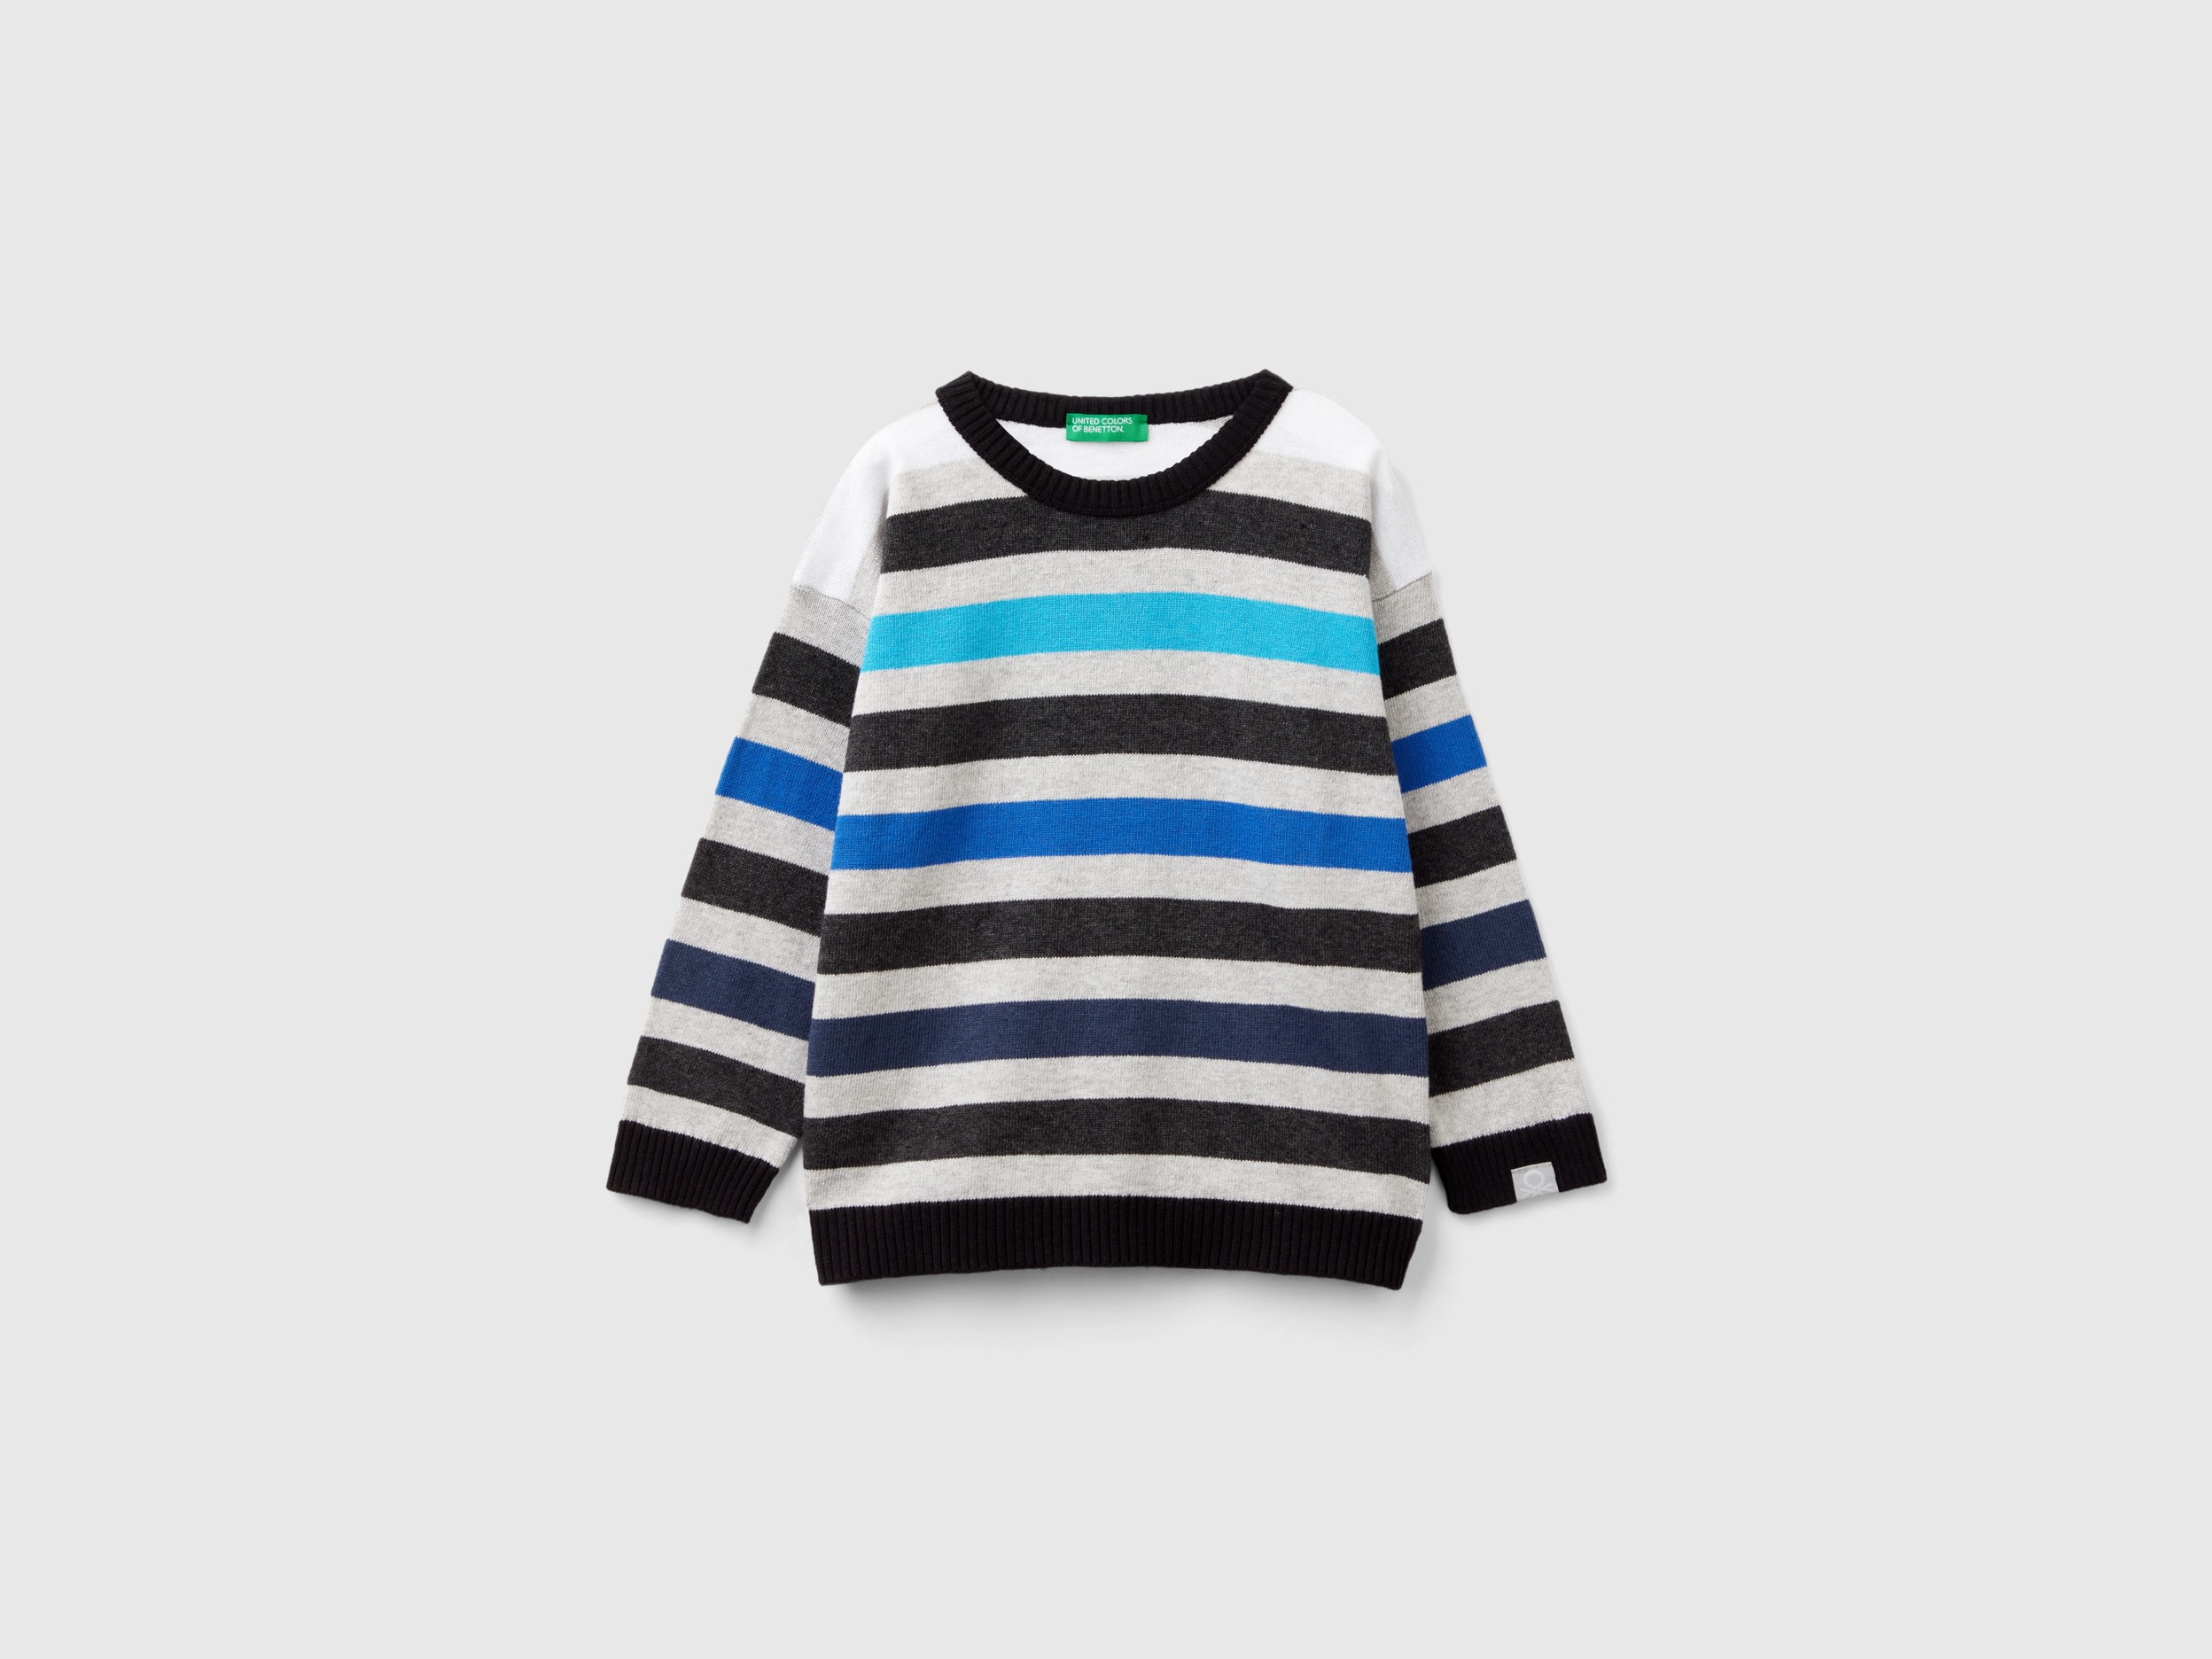 Image of Benetton, Striped Sweater, size 104, Multi-color, Kids